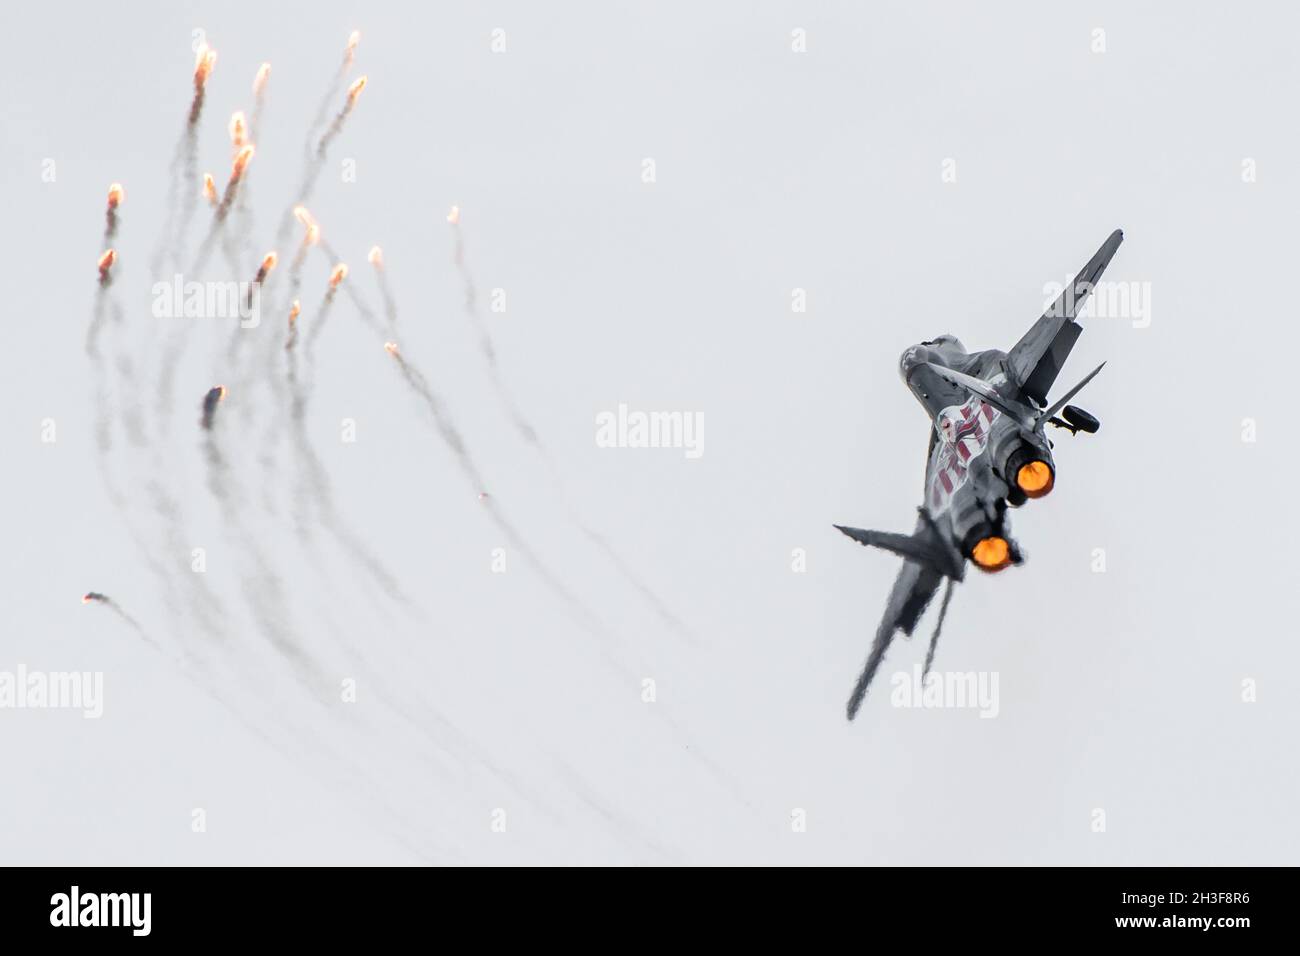 Mińsk Mazowiecki, Poland - May 10, 2014: Polish military jet Mig-29 releasing flares during EPMM air base open day with afterburner Stock Photo